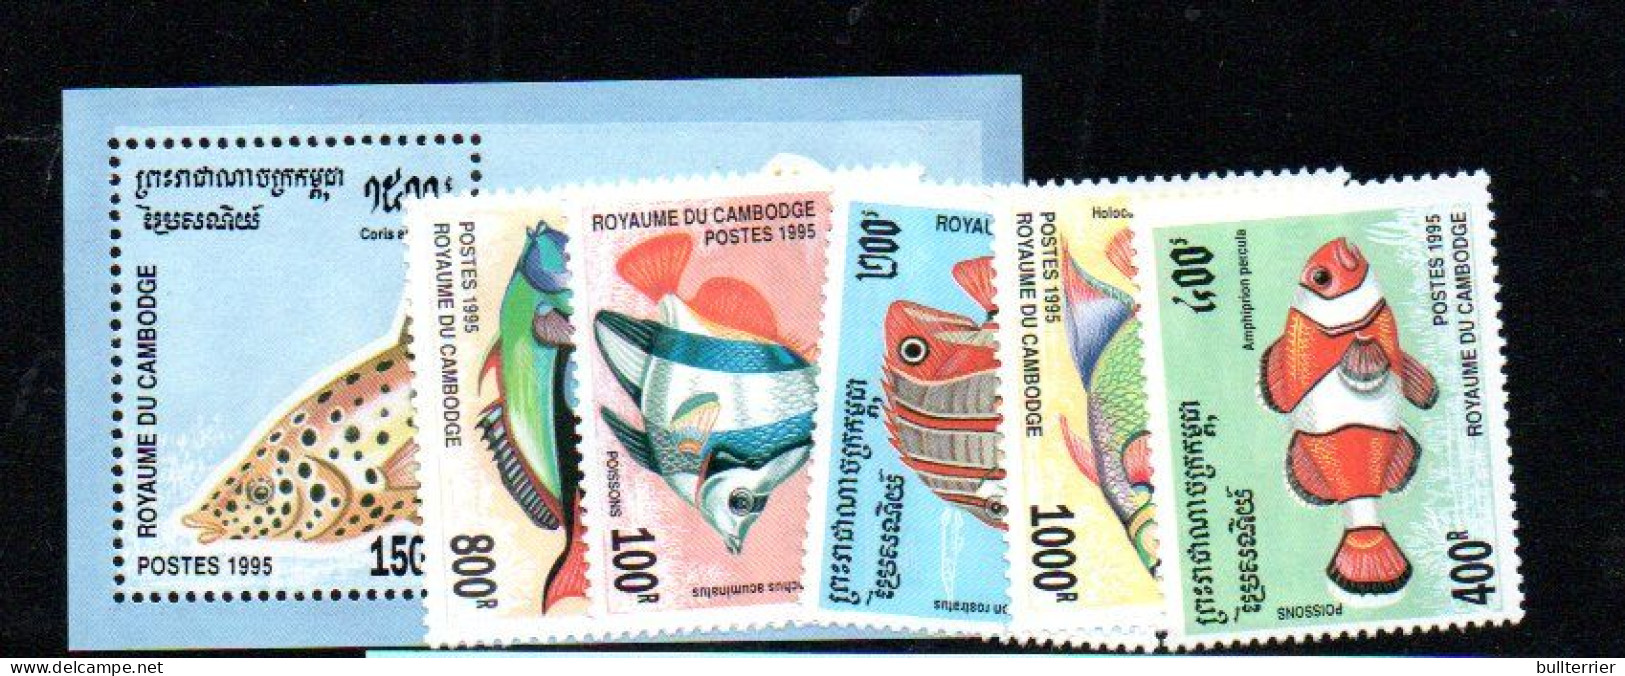 CAMBODIA - 1985 - FISHES SET OF 5 + SOUVENIR SHEET  MINT NEVER HINGED  SG CAT £16 - Cambodge